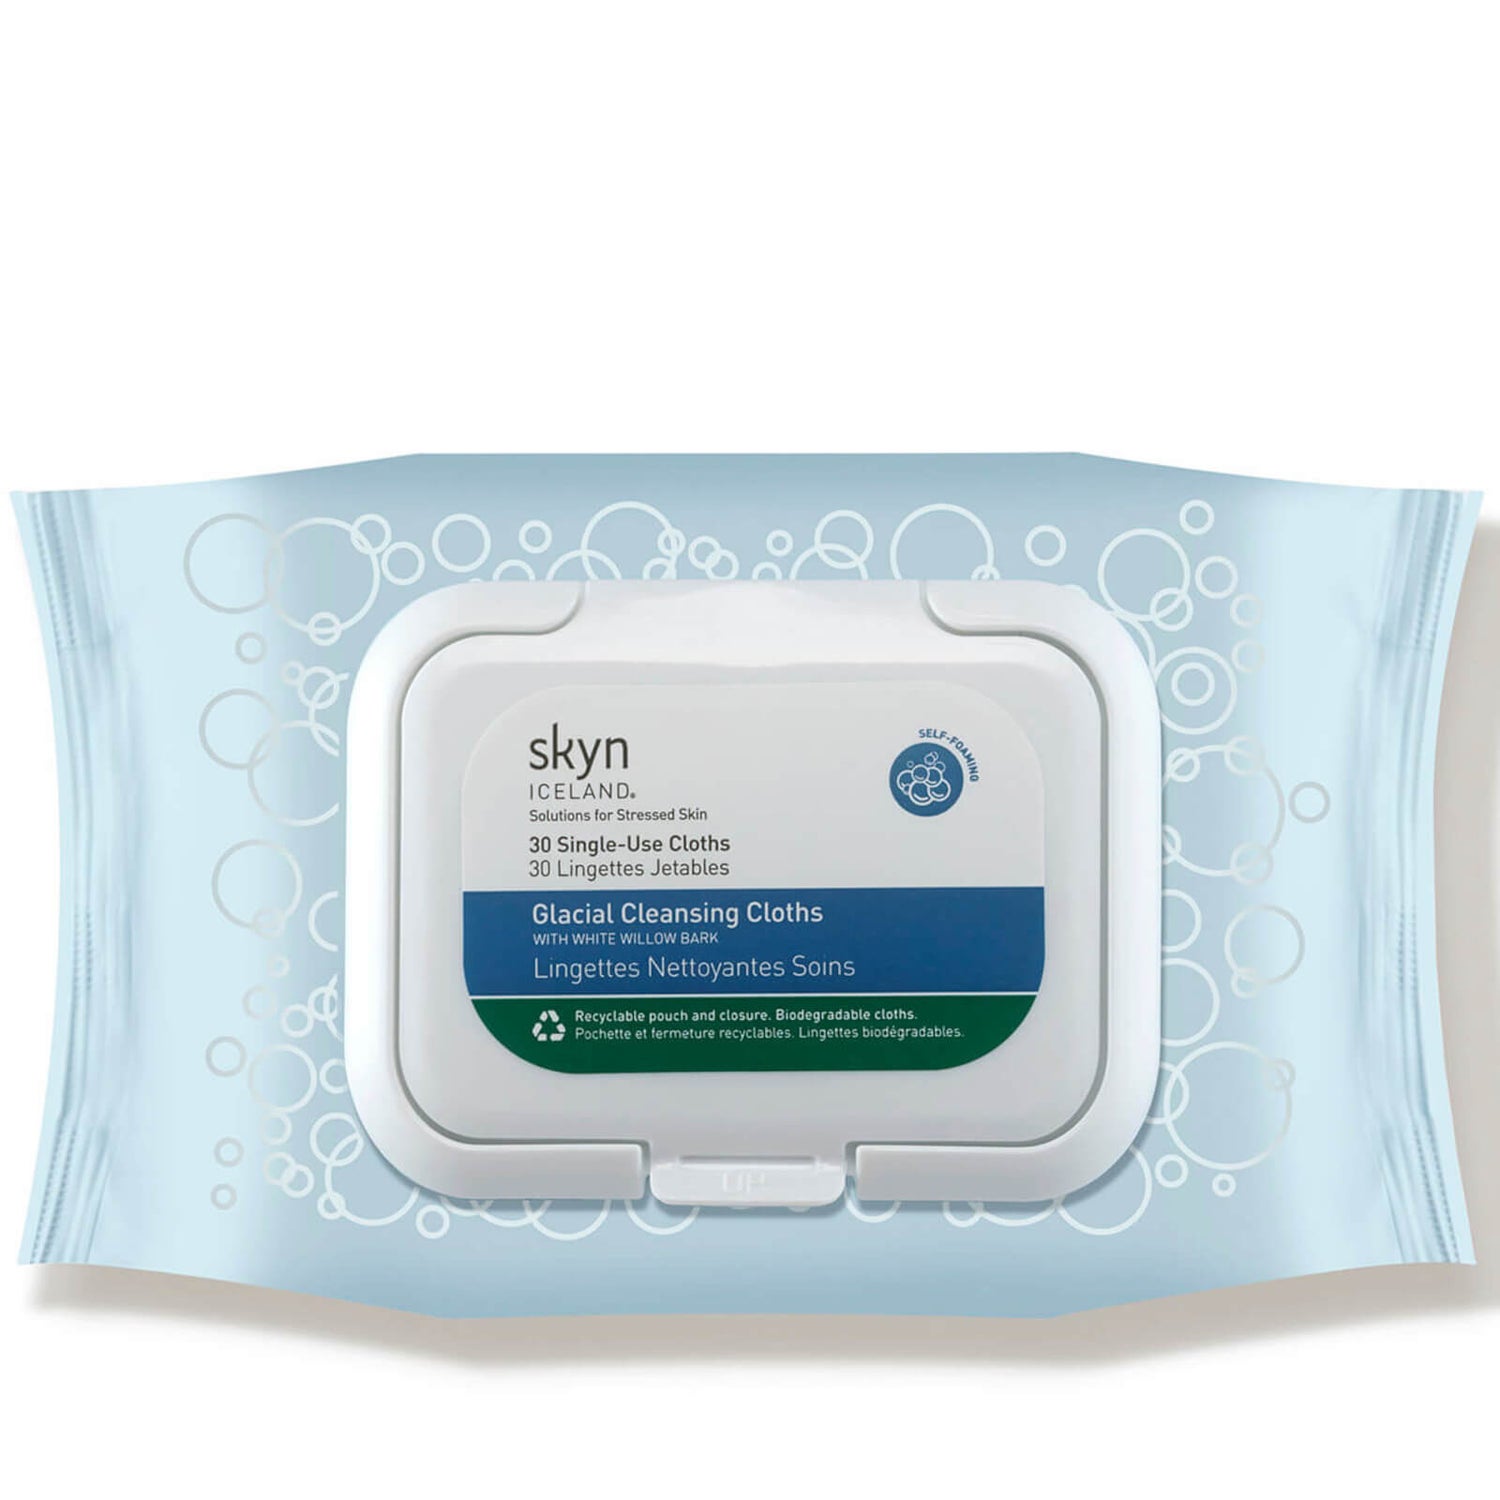 skyn ICELAND Glacial Cleansing Cloths (30 count)